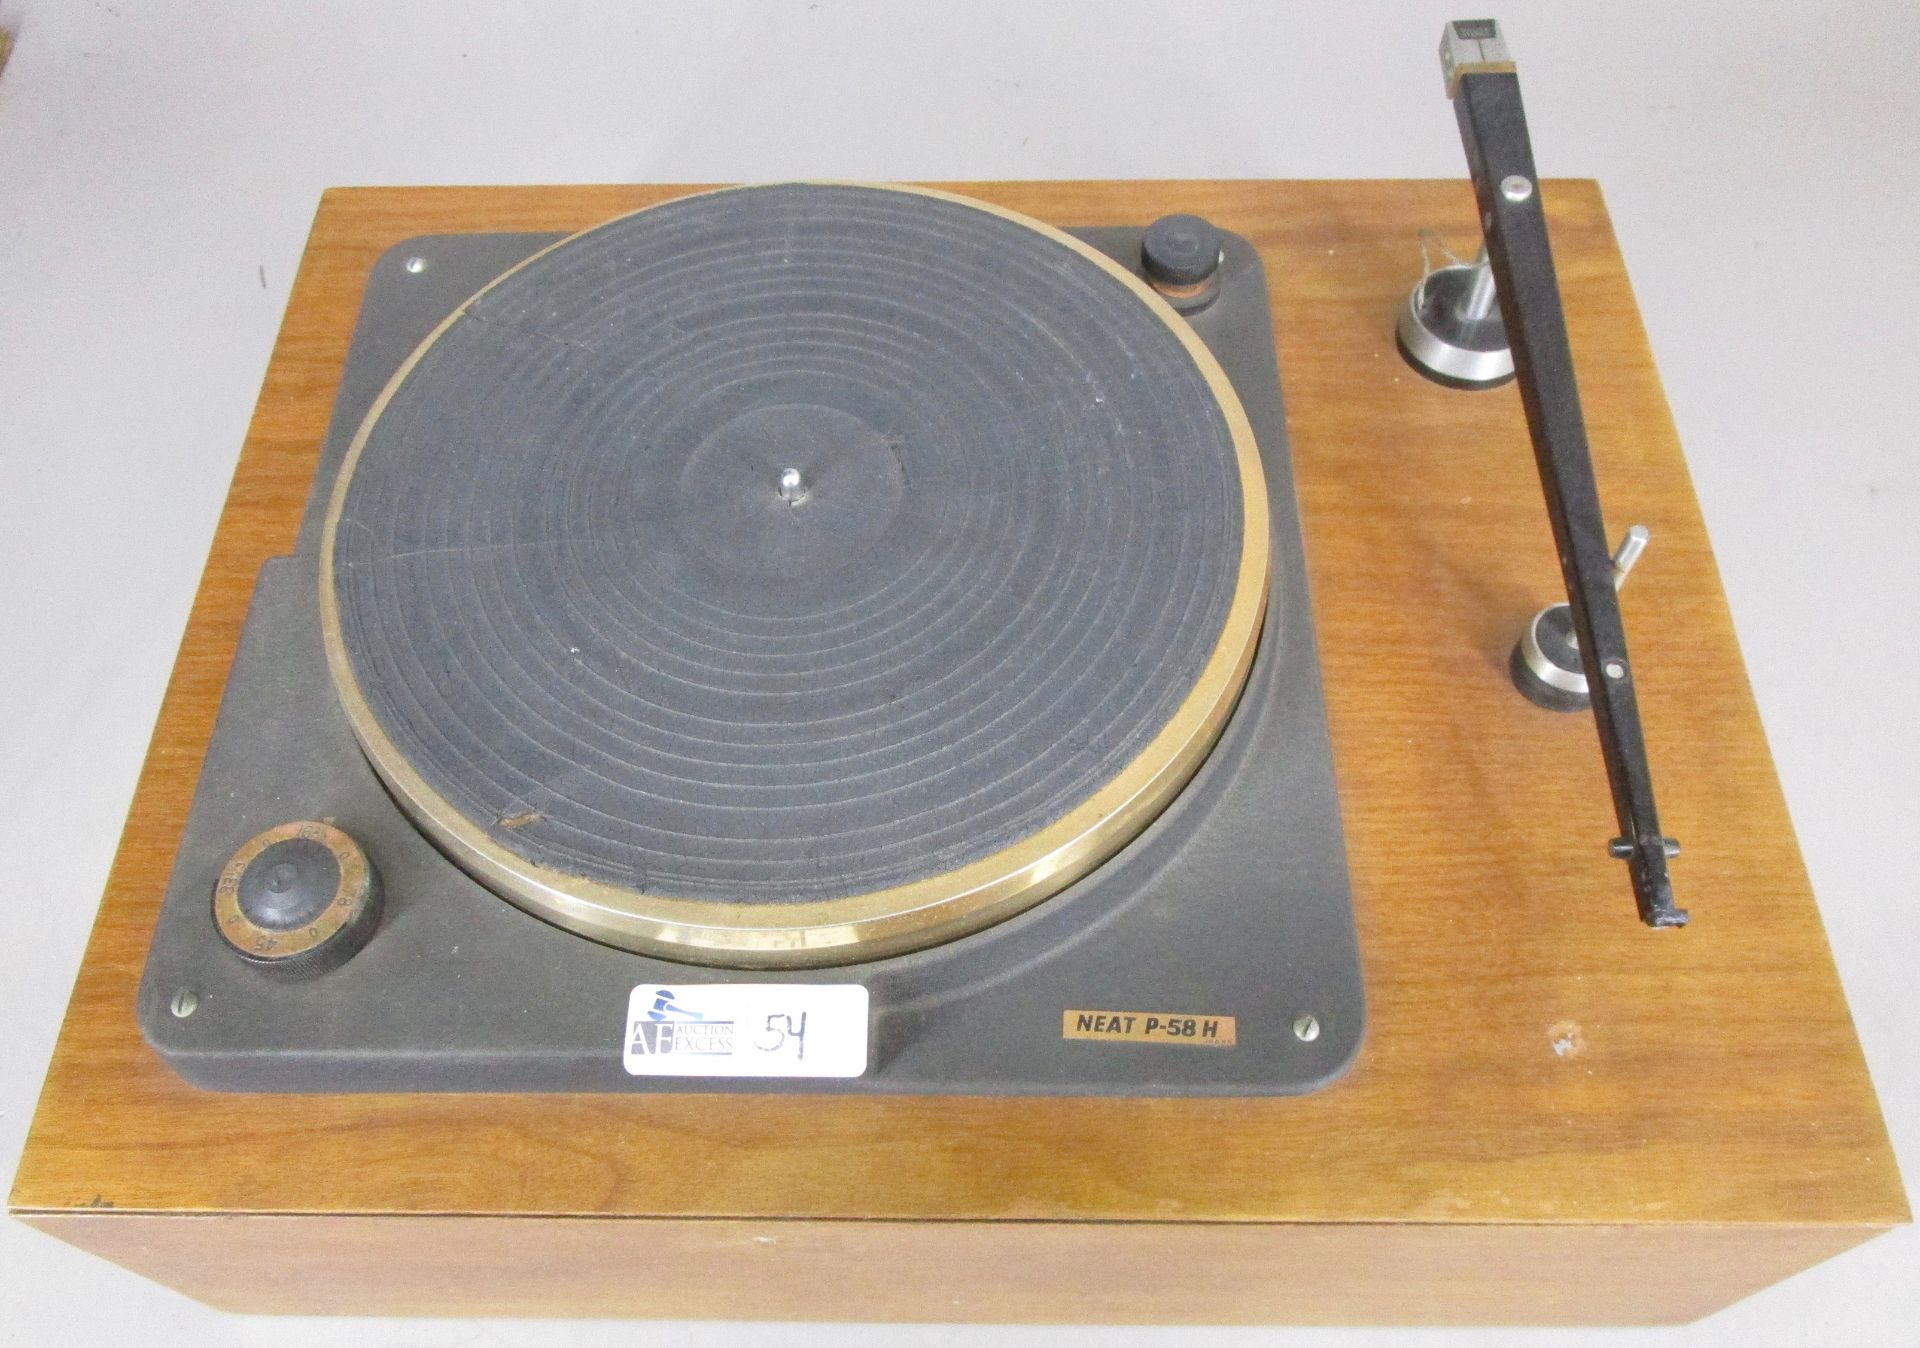 NEAT P-58 H TURNTABLE WITH SHURE TONEARM - Image 2 of 5